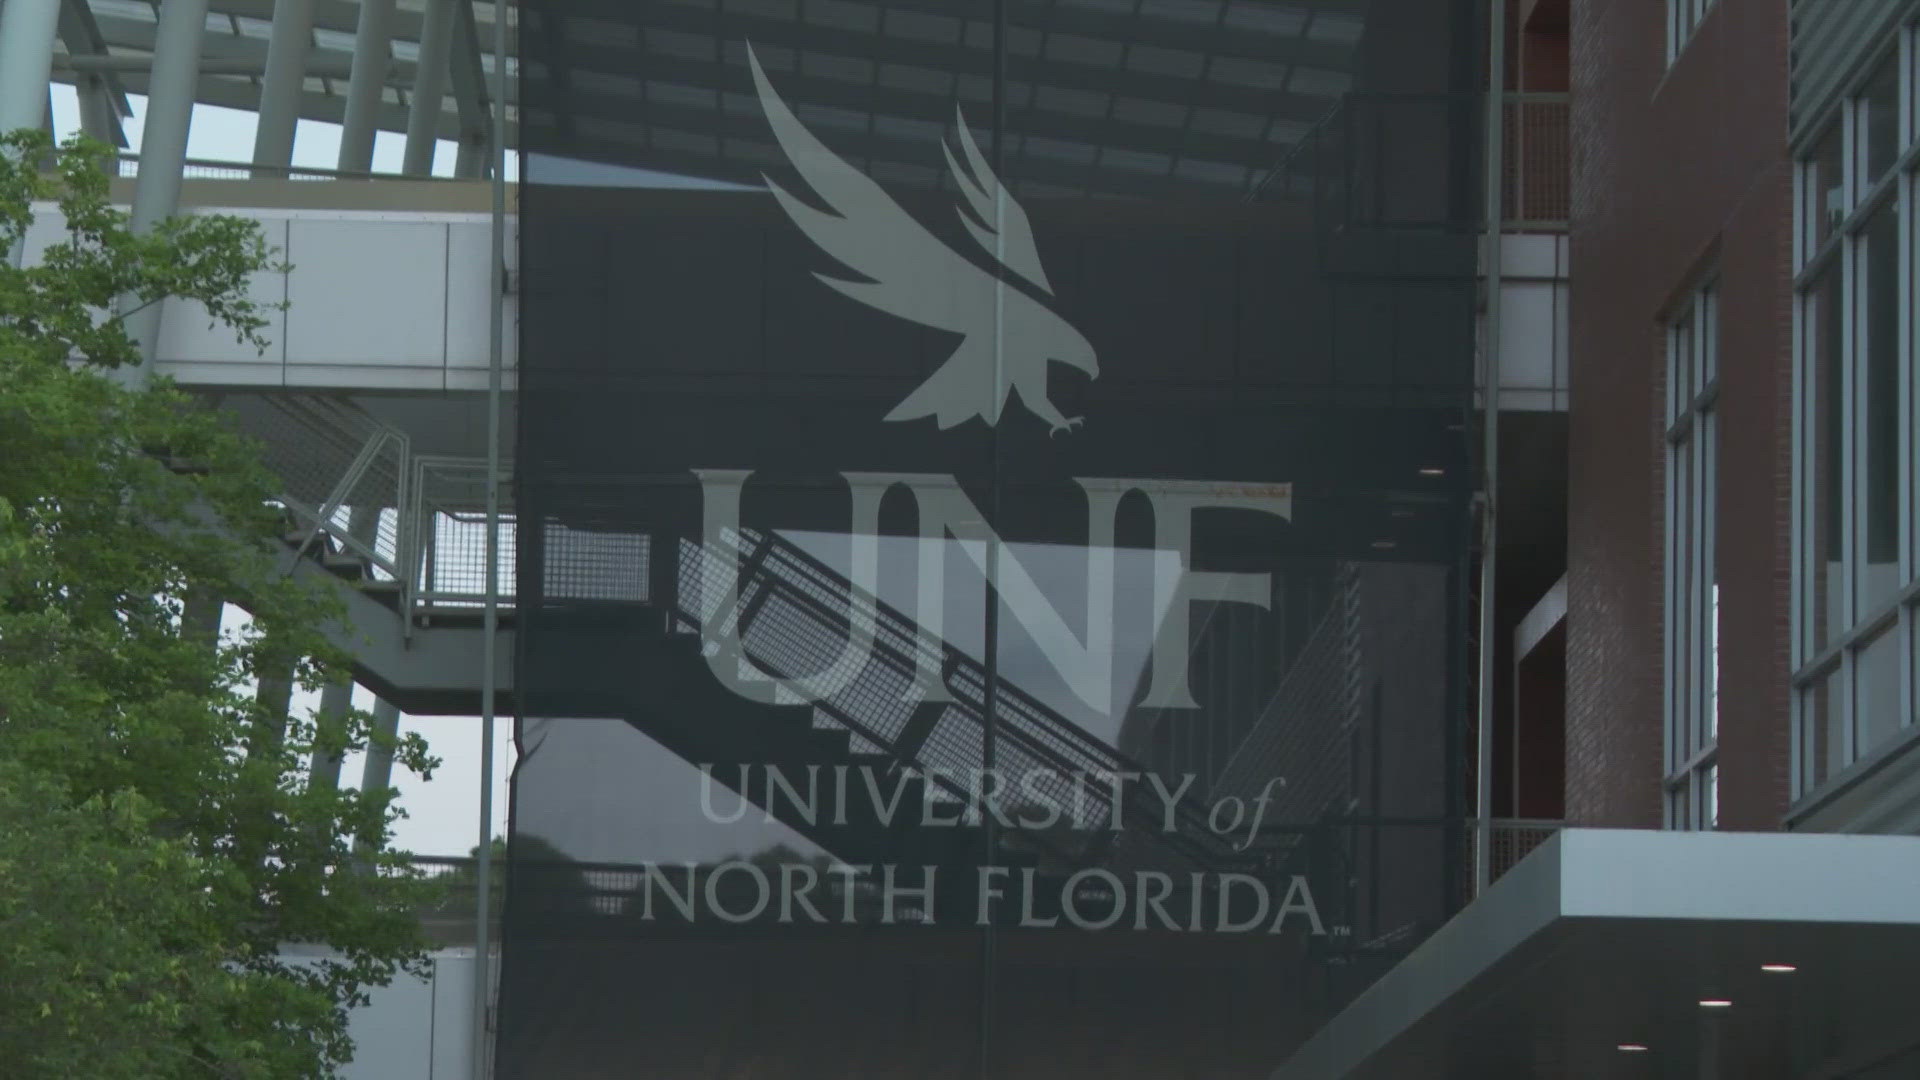 UNF closed the centers to comply with SB 266, which prohibits public colleges and universities from using federal money to fund DEI programs.